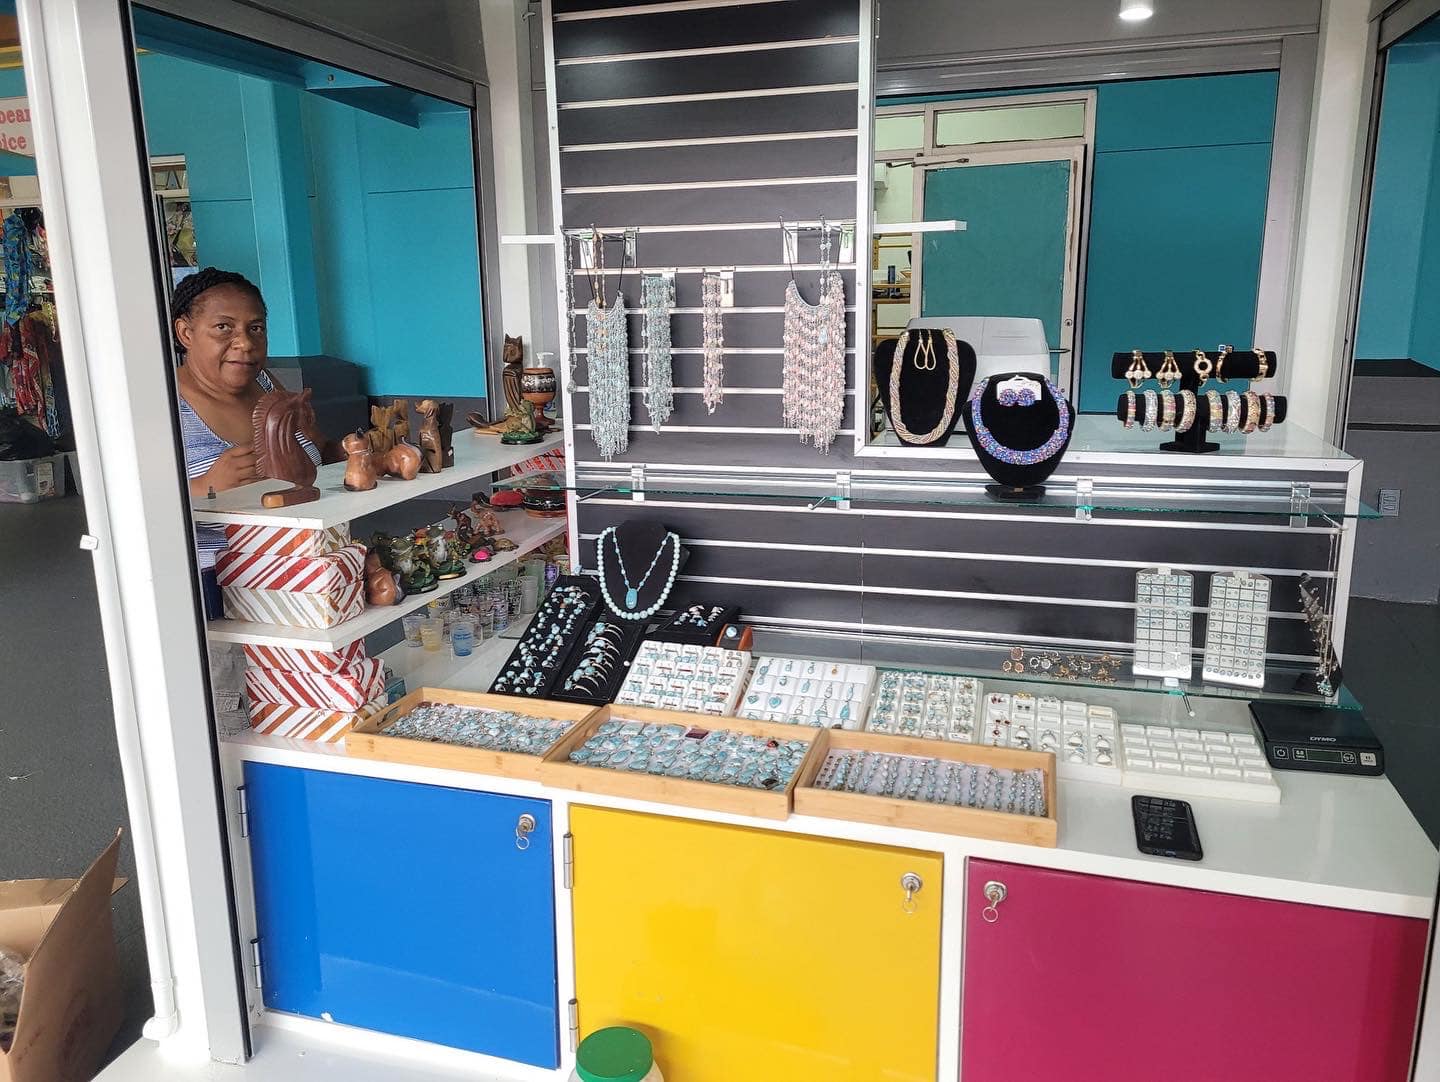 VIPA Shows Off Newly Renovated Vendor's Plaza At Crown Bay Center In St. Thomas